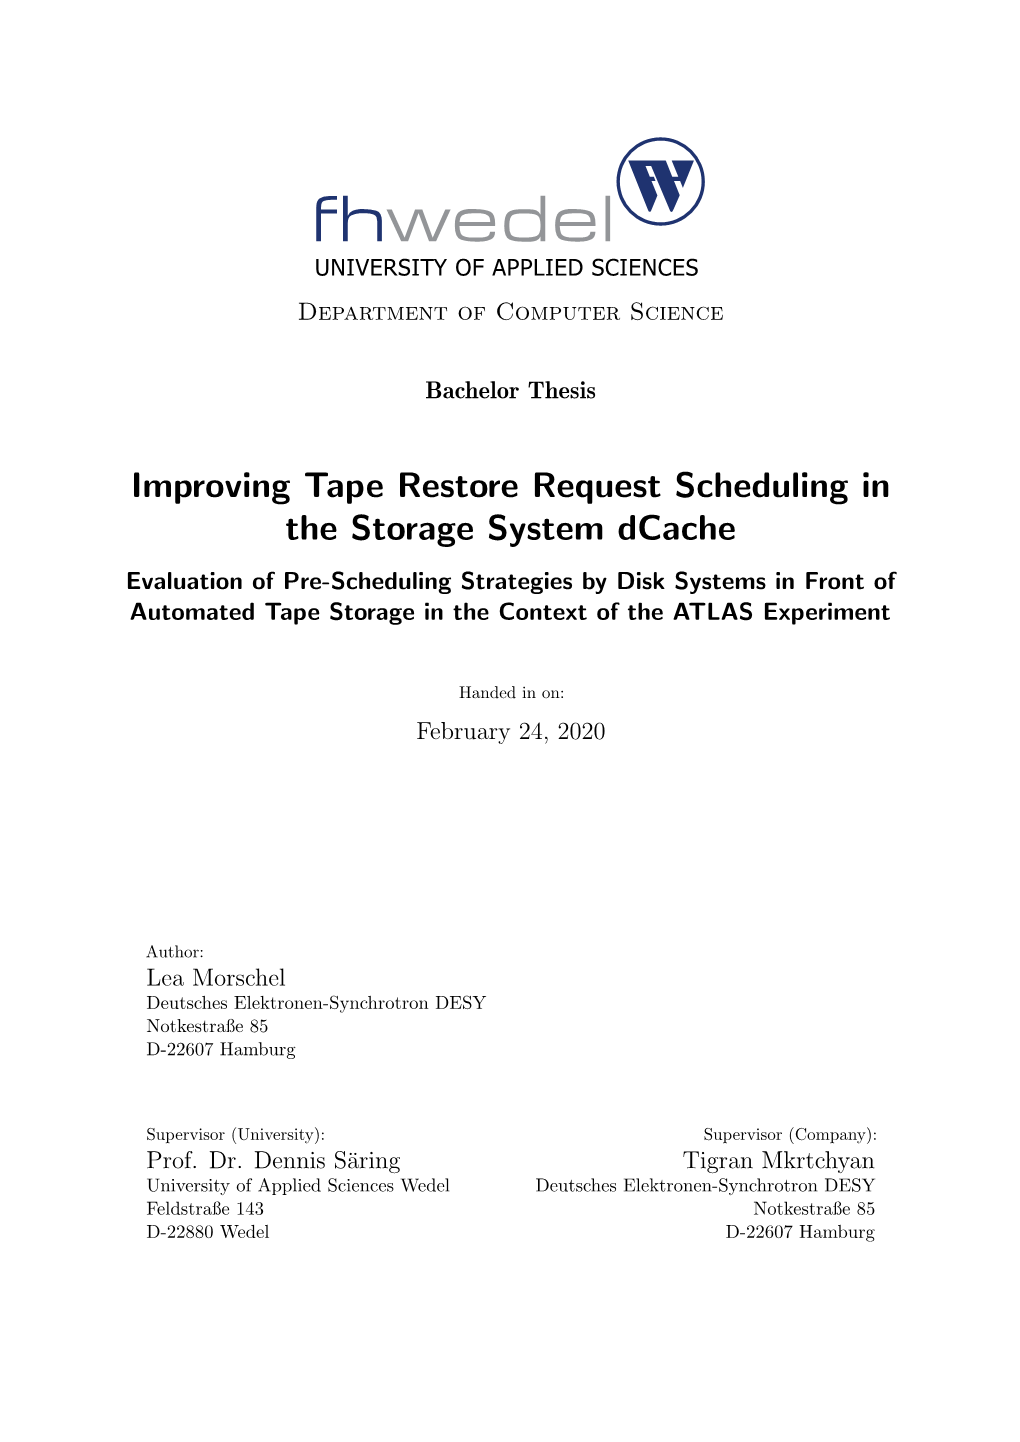 Improving Tape Restore Request Scheduling in the Storage System